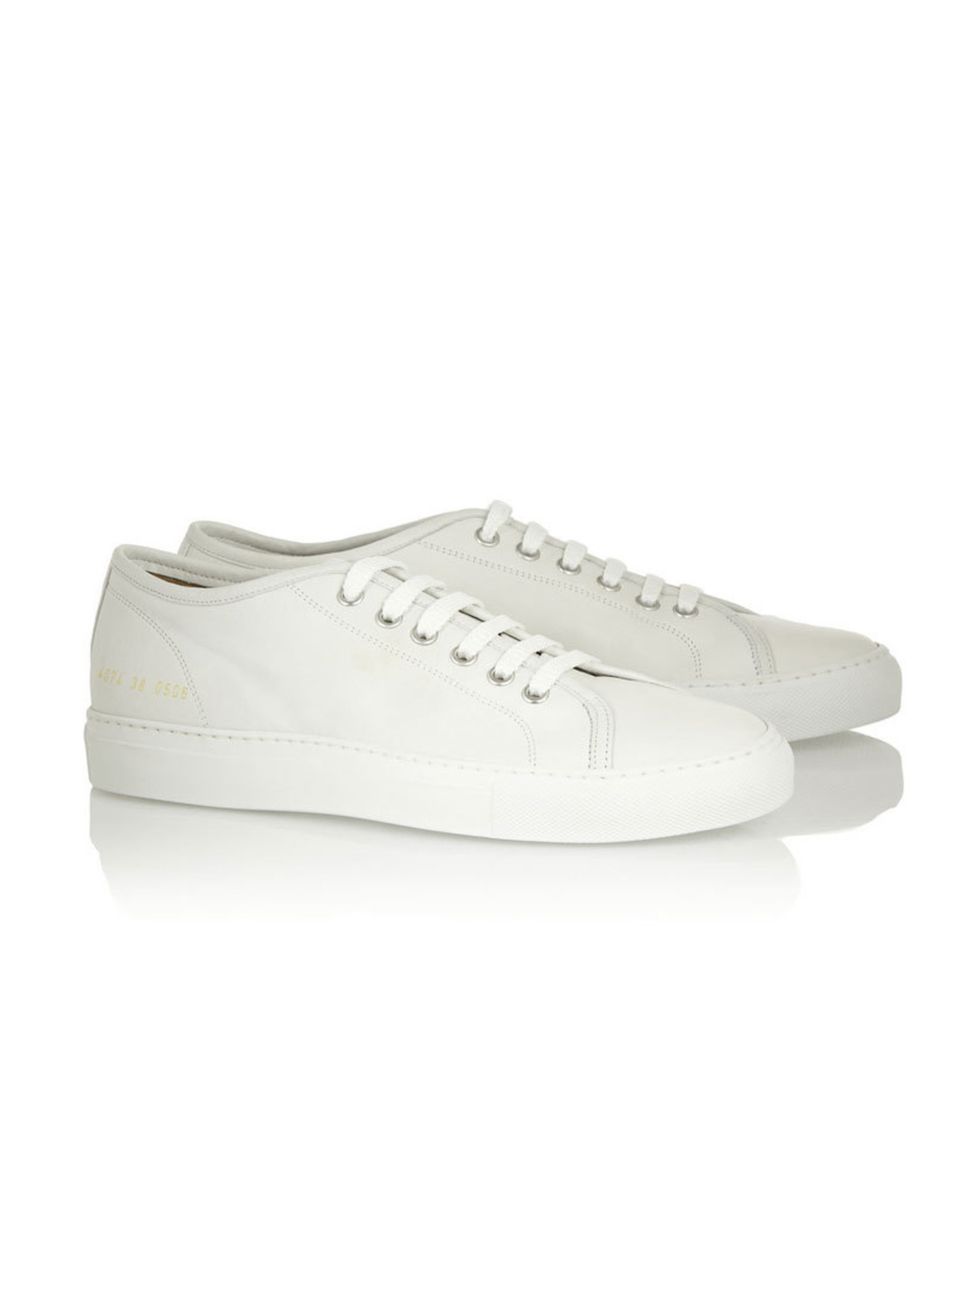 <p><strong>White Trainers </strong></p>

<p>Box fresh obviously.</p>

<p>Common Projects £250, <a href="http://www.net-a-porter.com/product/458856/Common_Projects/tournament-leather-sneakers">Net-a-porter</a></p>